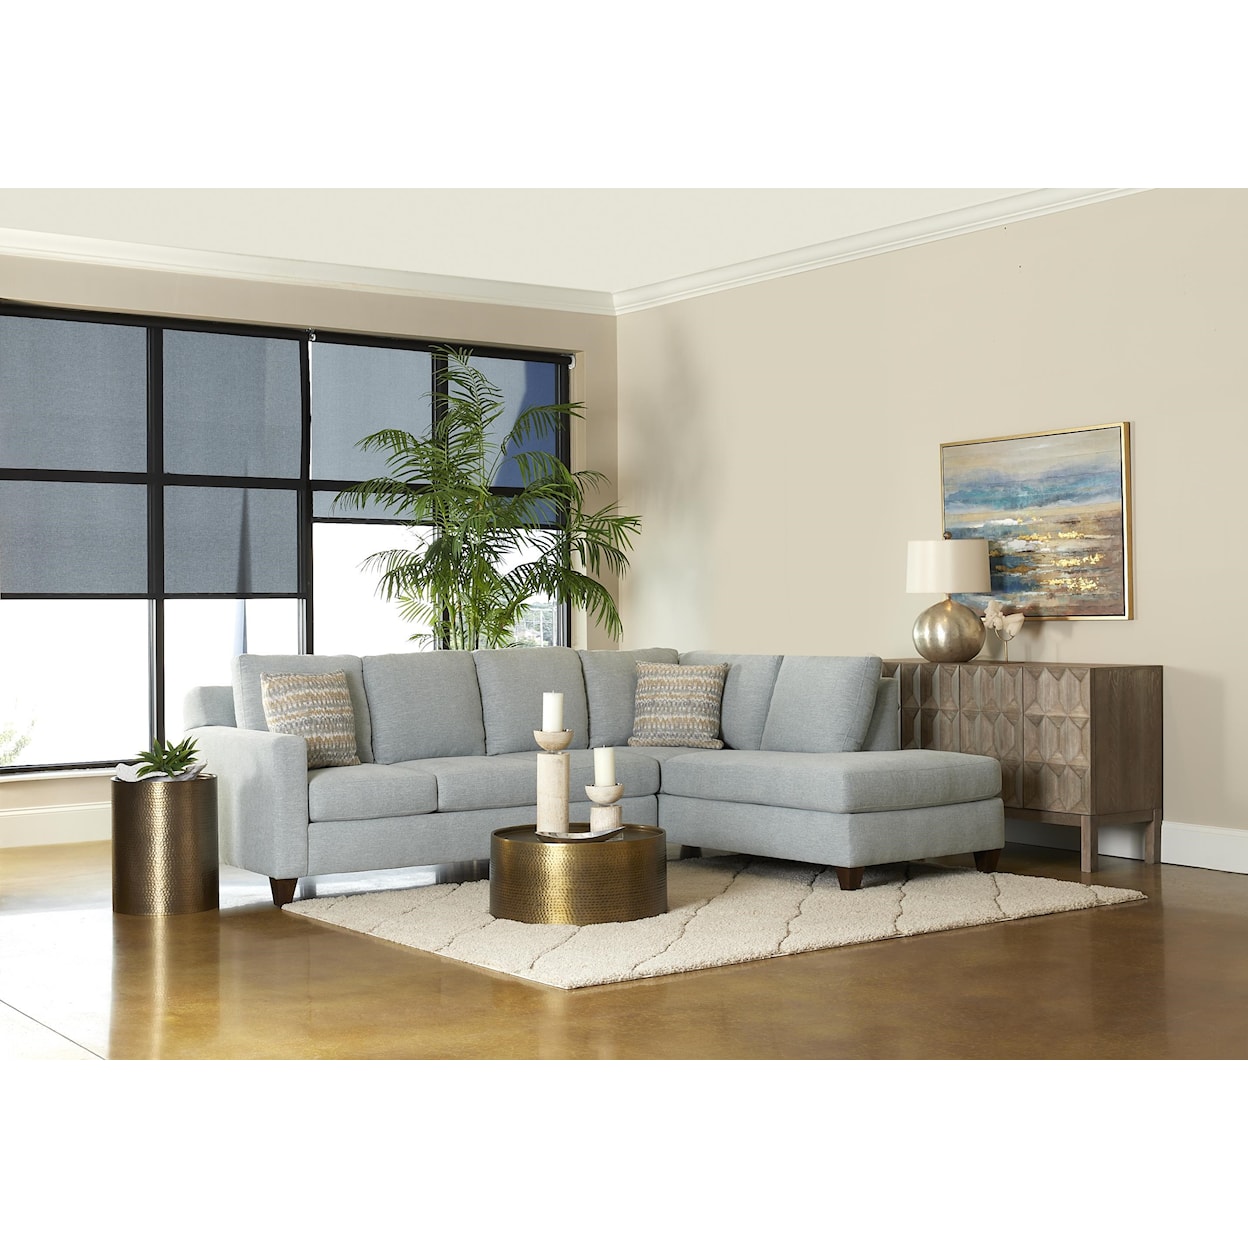 Klaussner Bosco 2 Piece Sectional